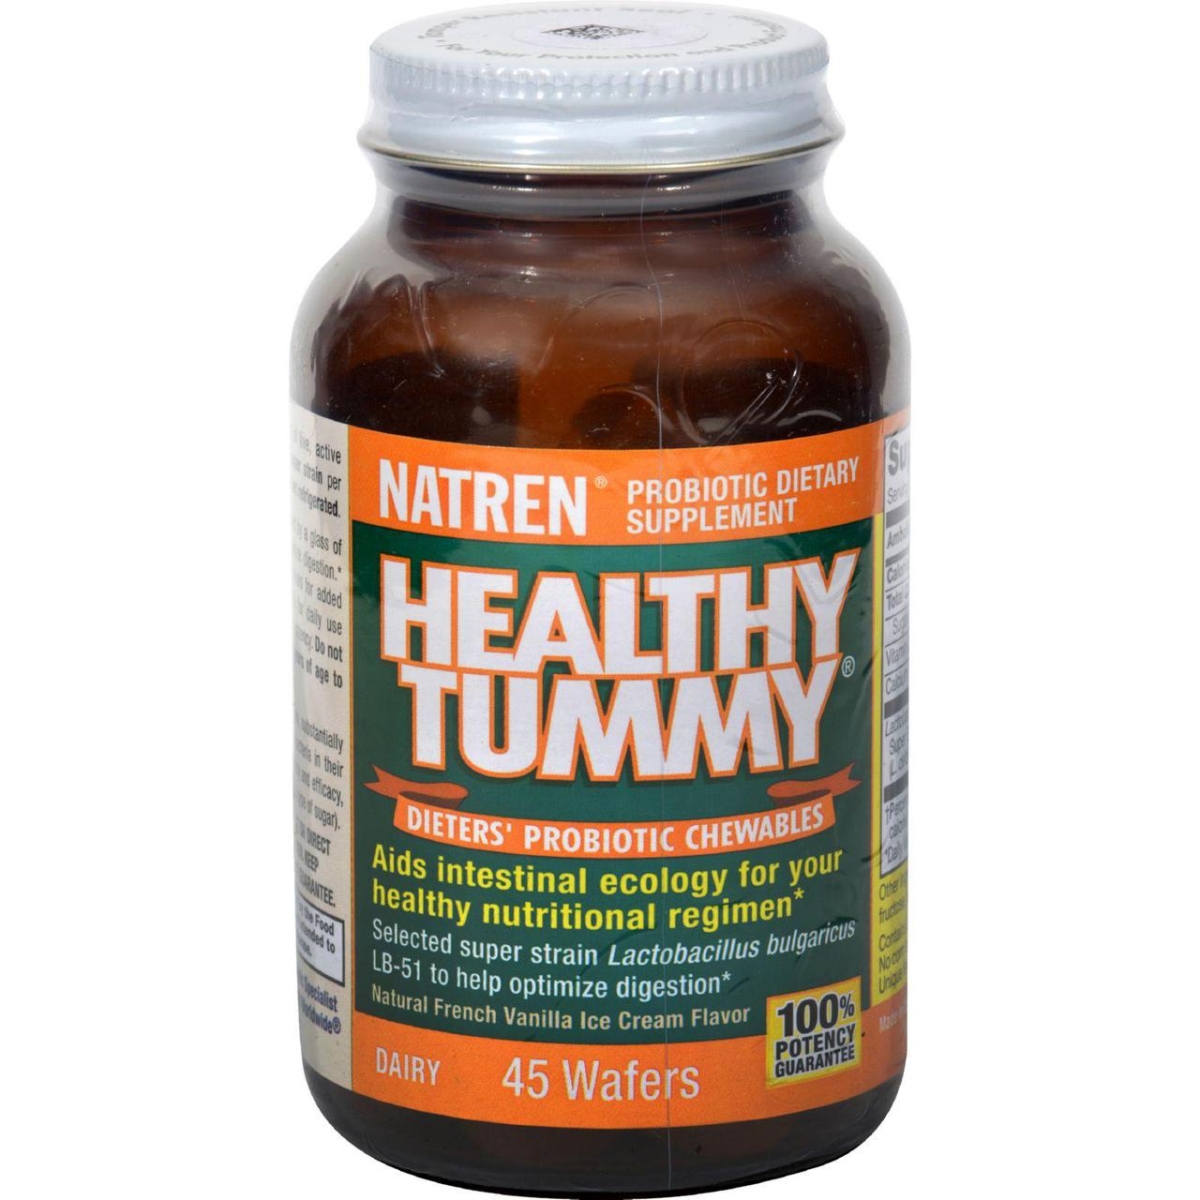 Hg0535005 Healthy Tummy Probiotic Chewables, Natural French Vanilla Ice Cream Flavor - 45 Wafers